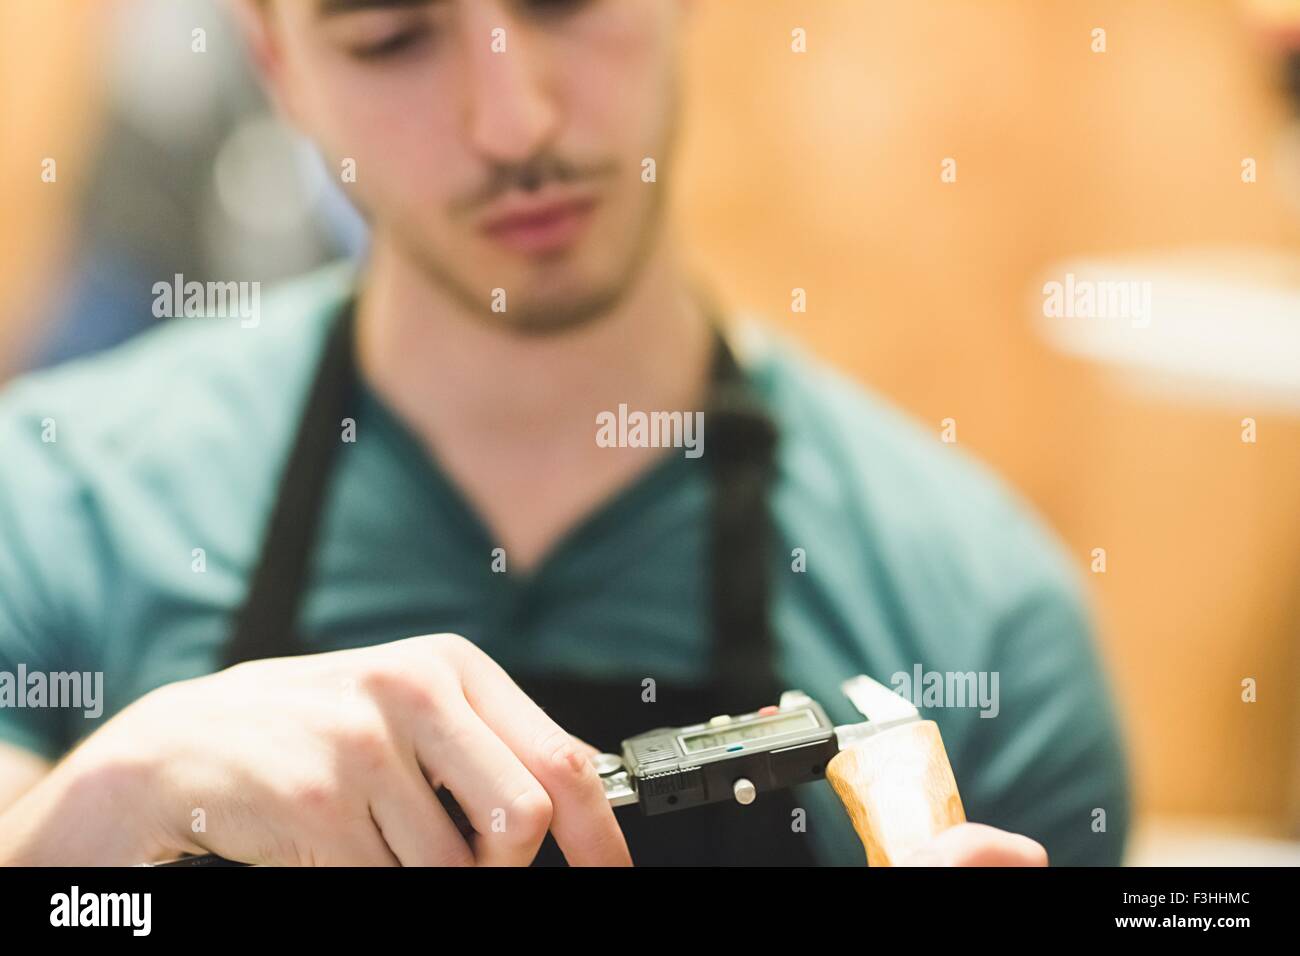 Young man wearing apron crafting wood object with tool, looking down Stock Photo